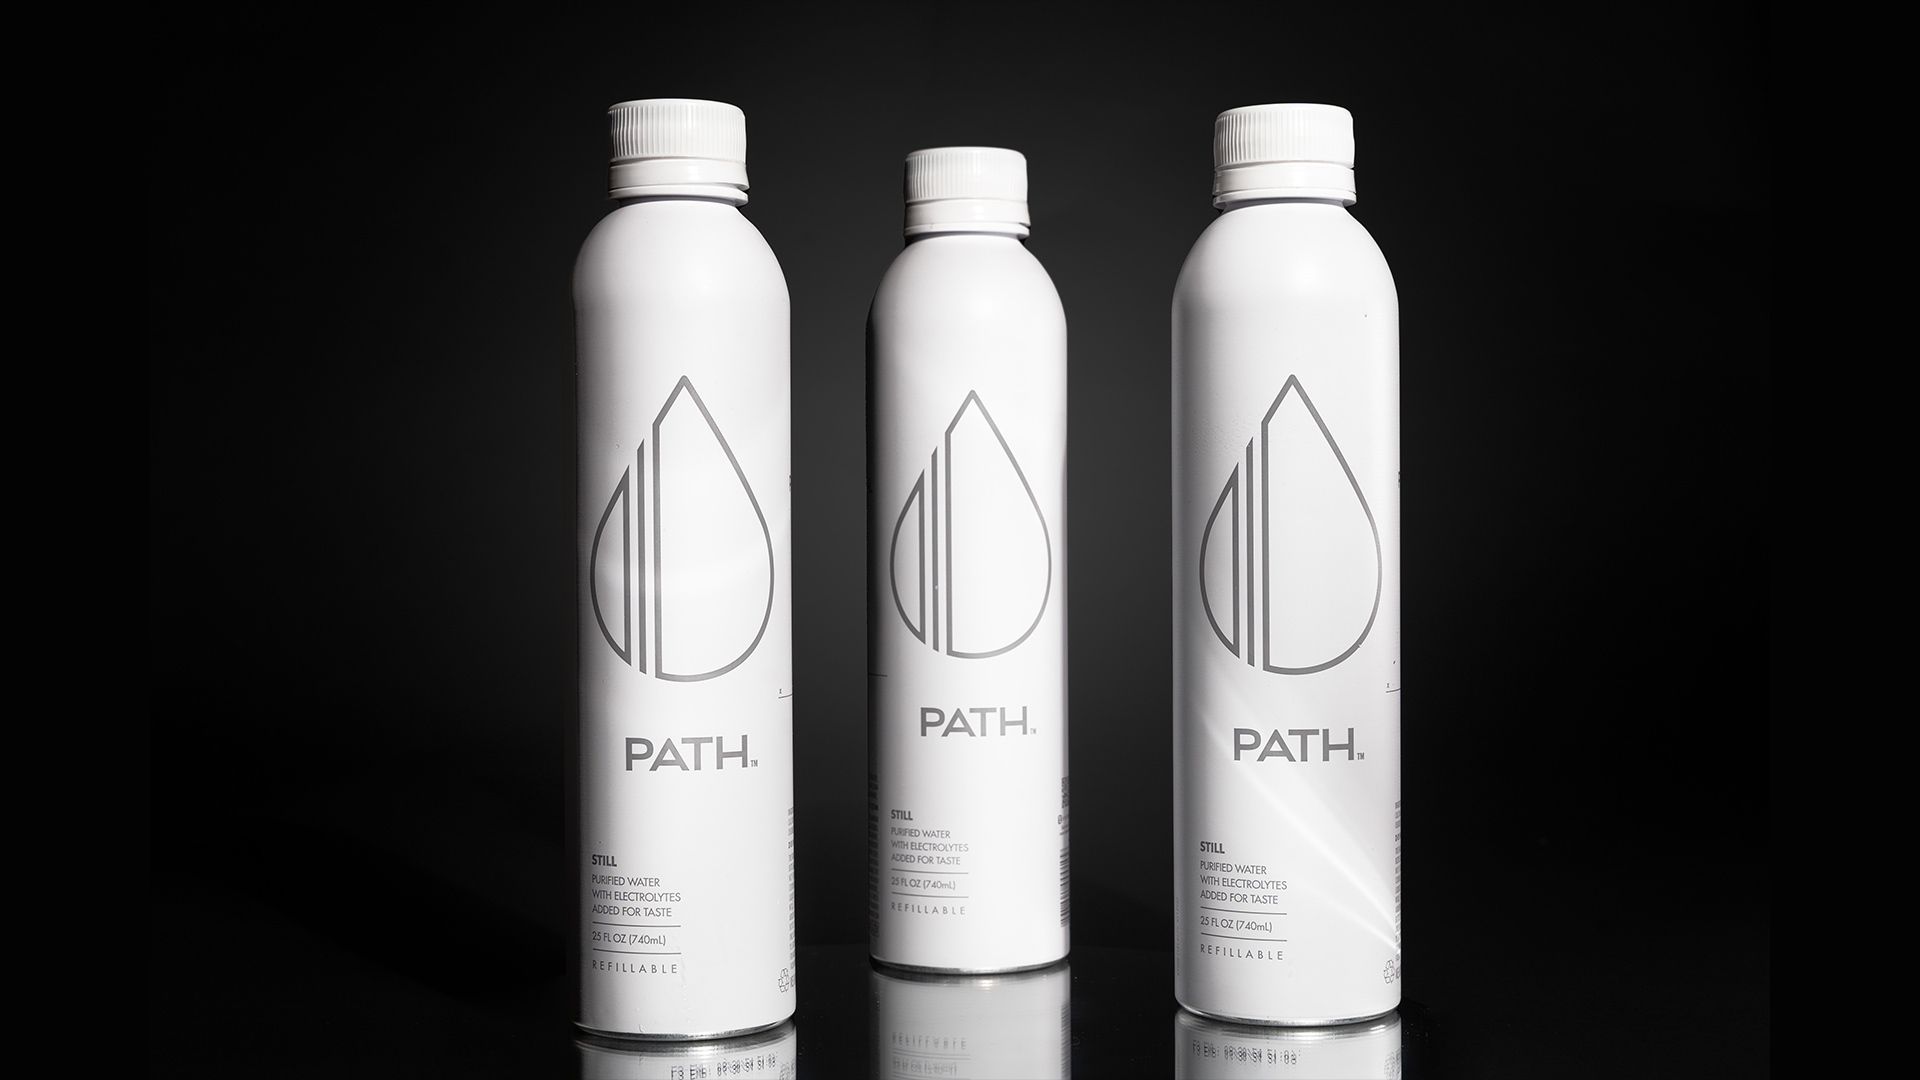 Three white aluminum bottles of Path water on a black background.